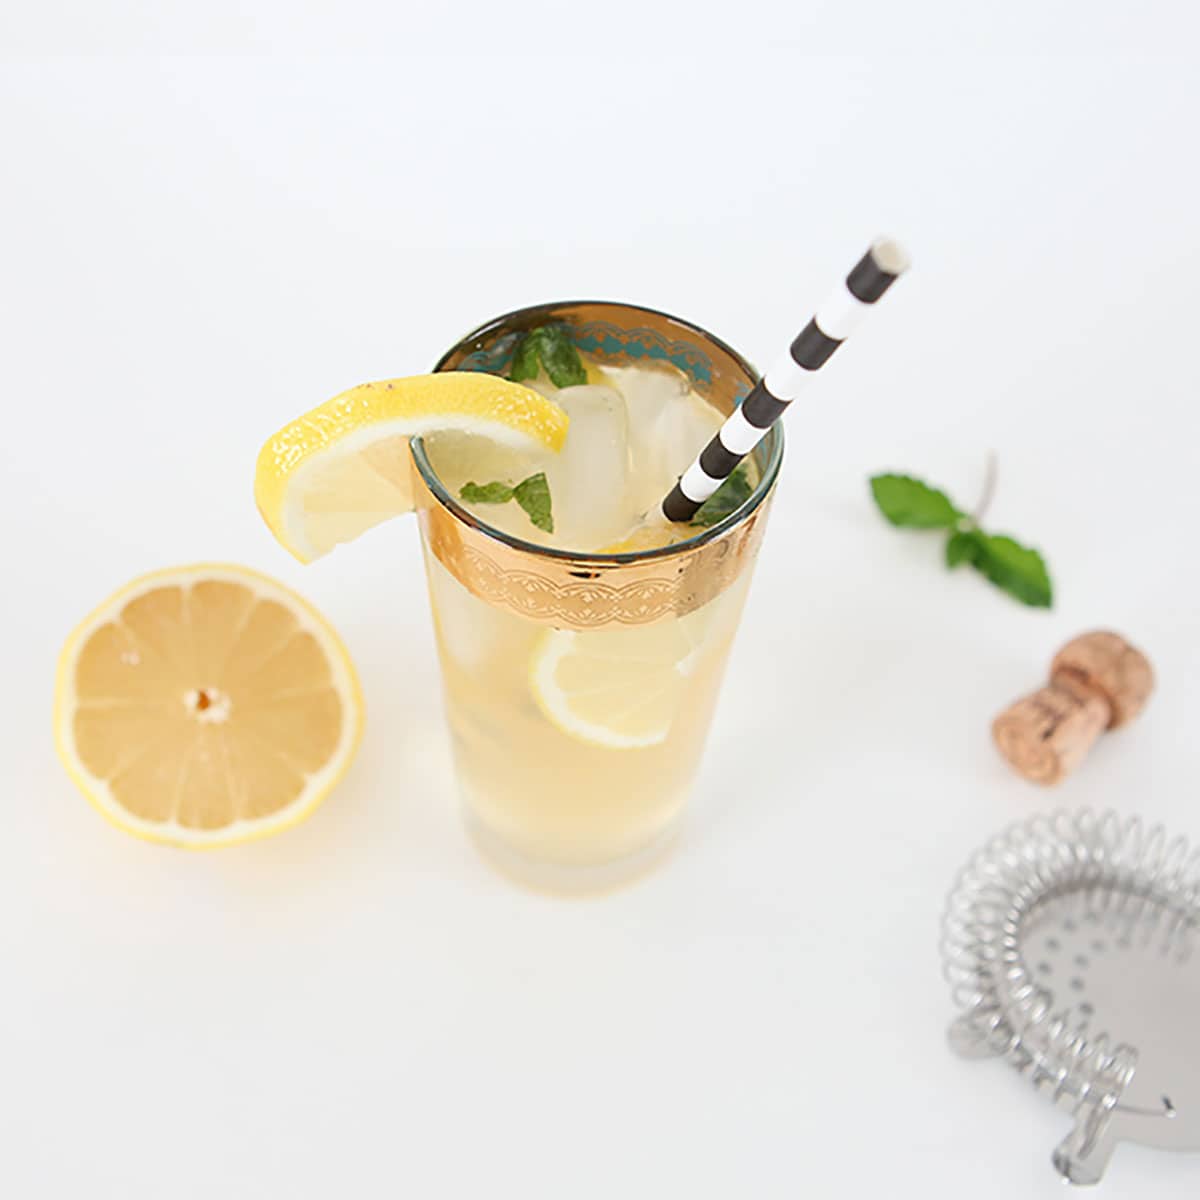 Champagne Smash Cocktail Recipe perfect drink for New Year's Eve